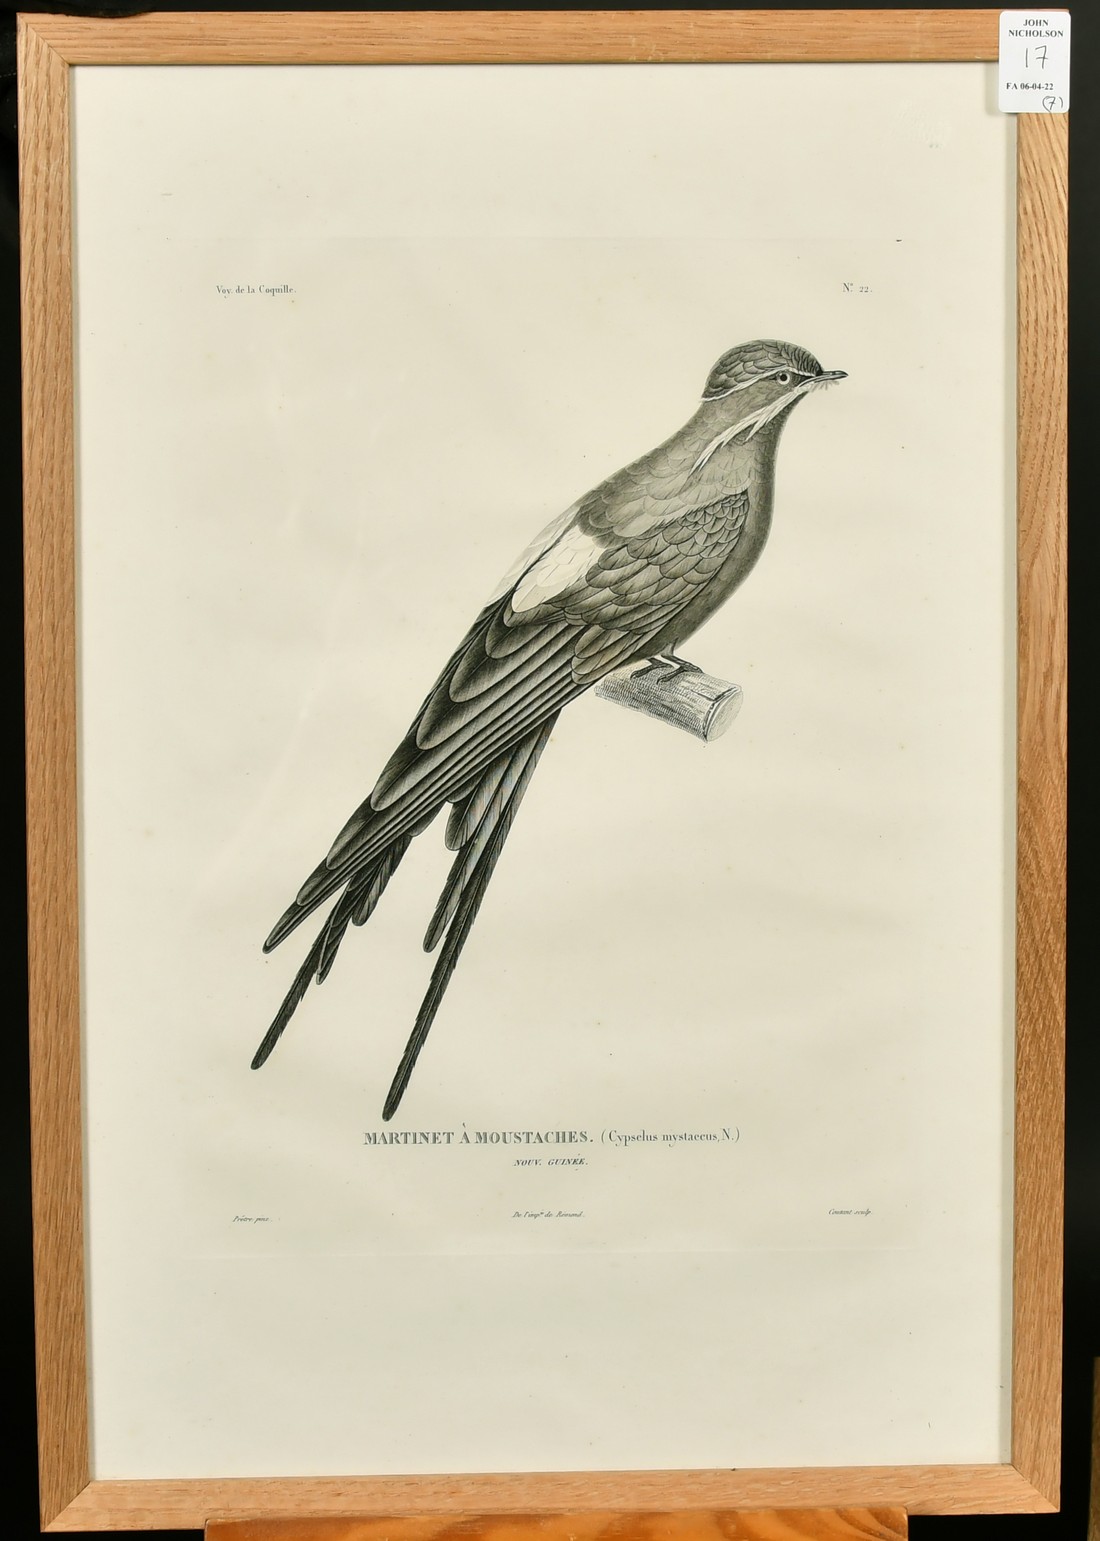 Coutant after Pretre, a group of seven ornithological plates from the voyage de la Coquille, each - Image 7 of 8